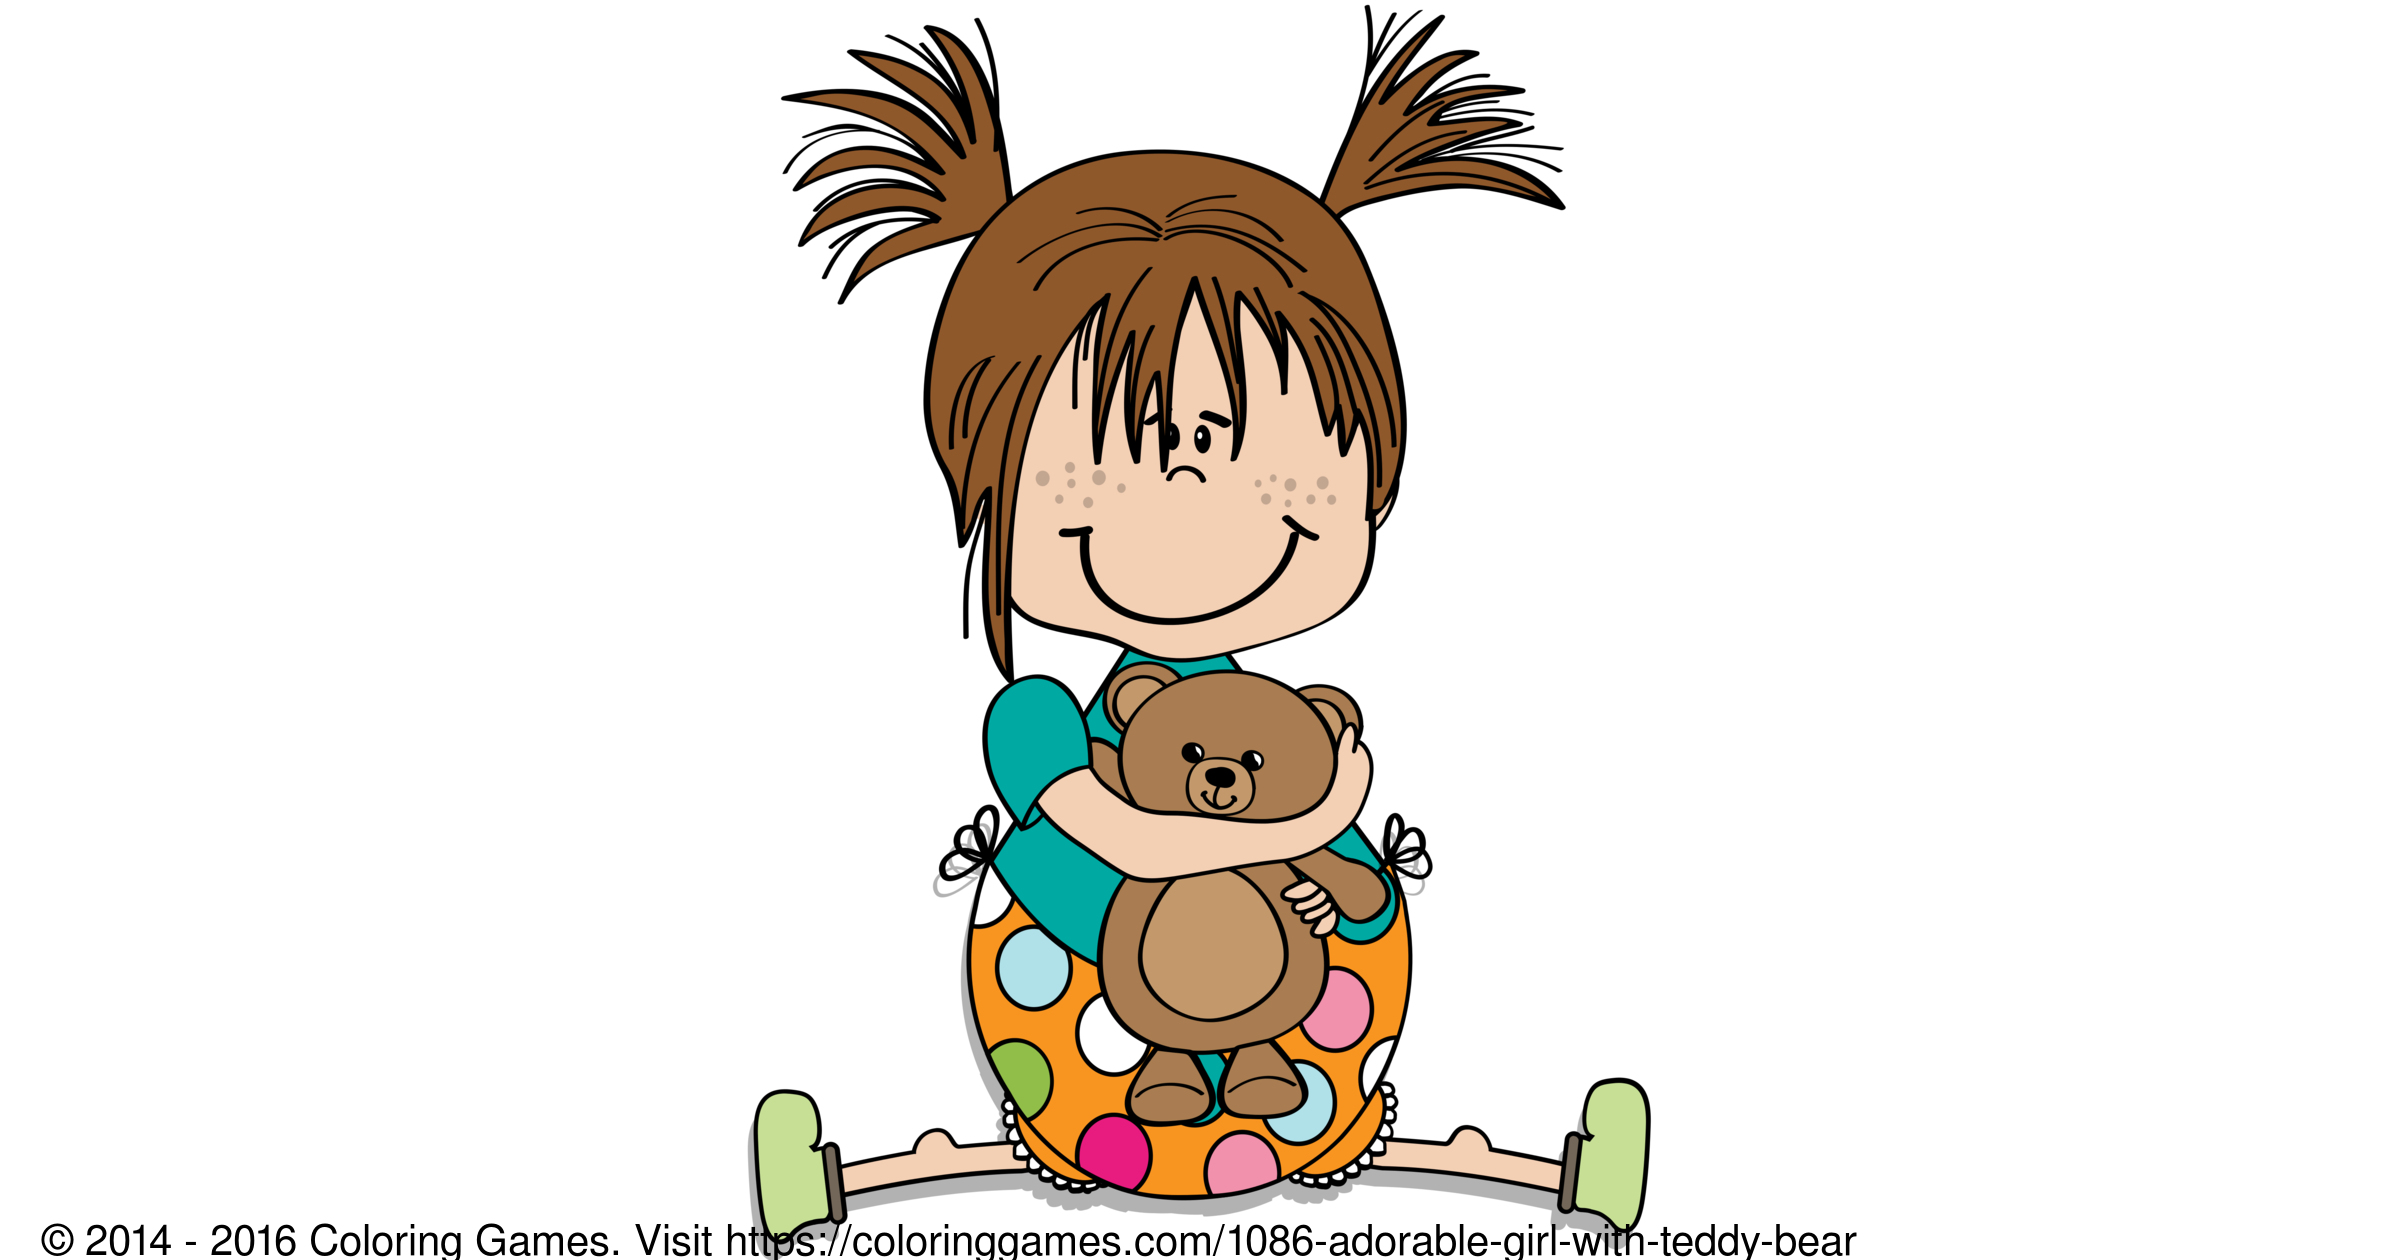 Adorable Girl with Teddy Bear - Coloring Games and Coloring Pages